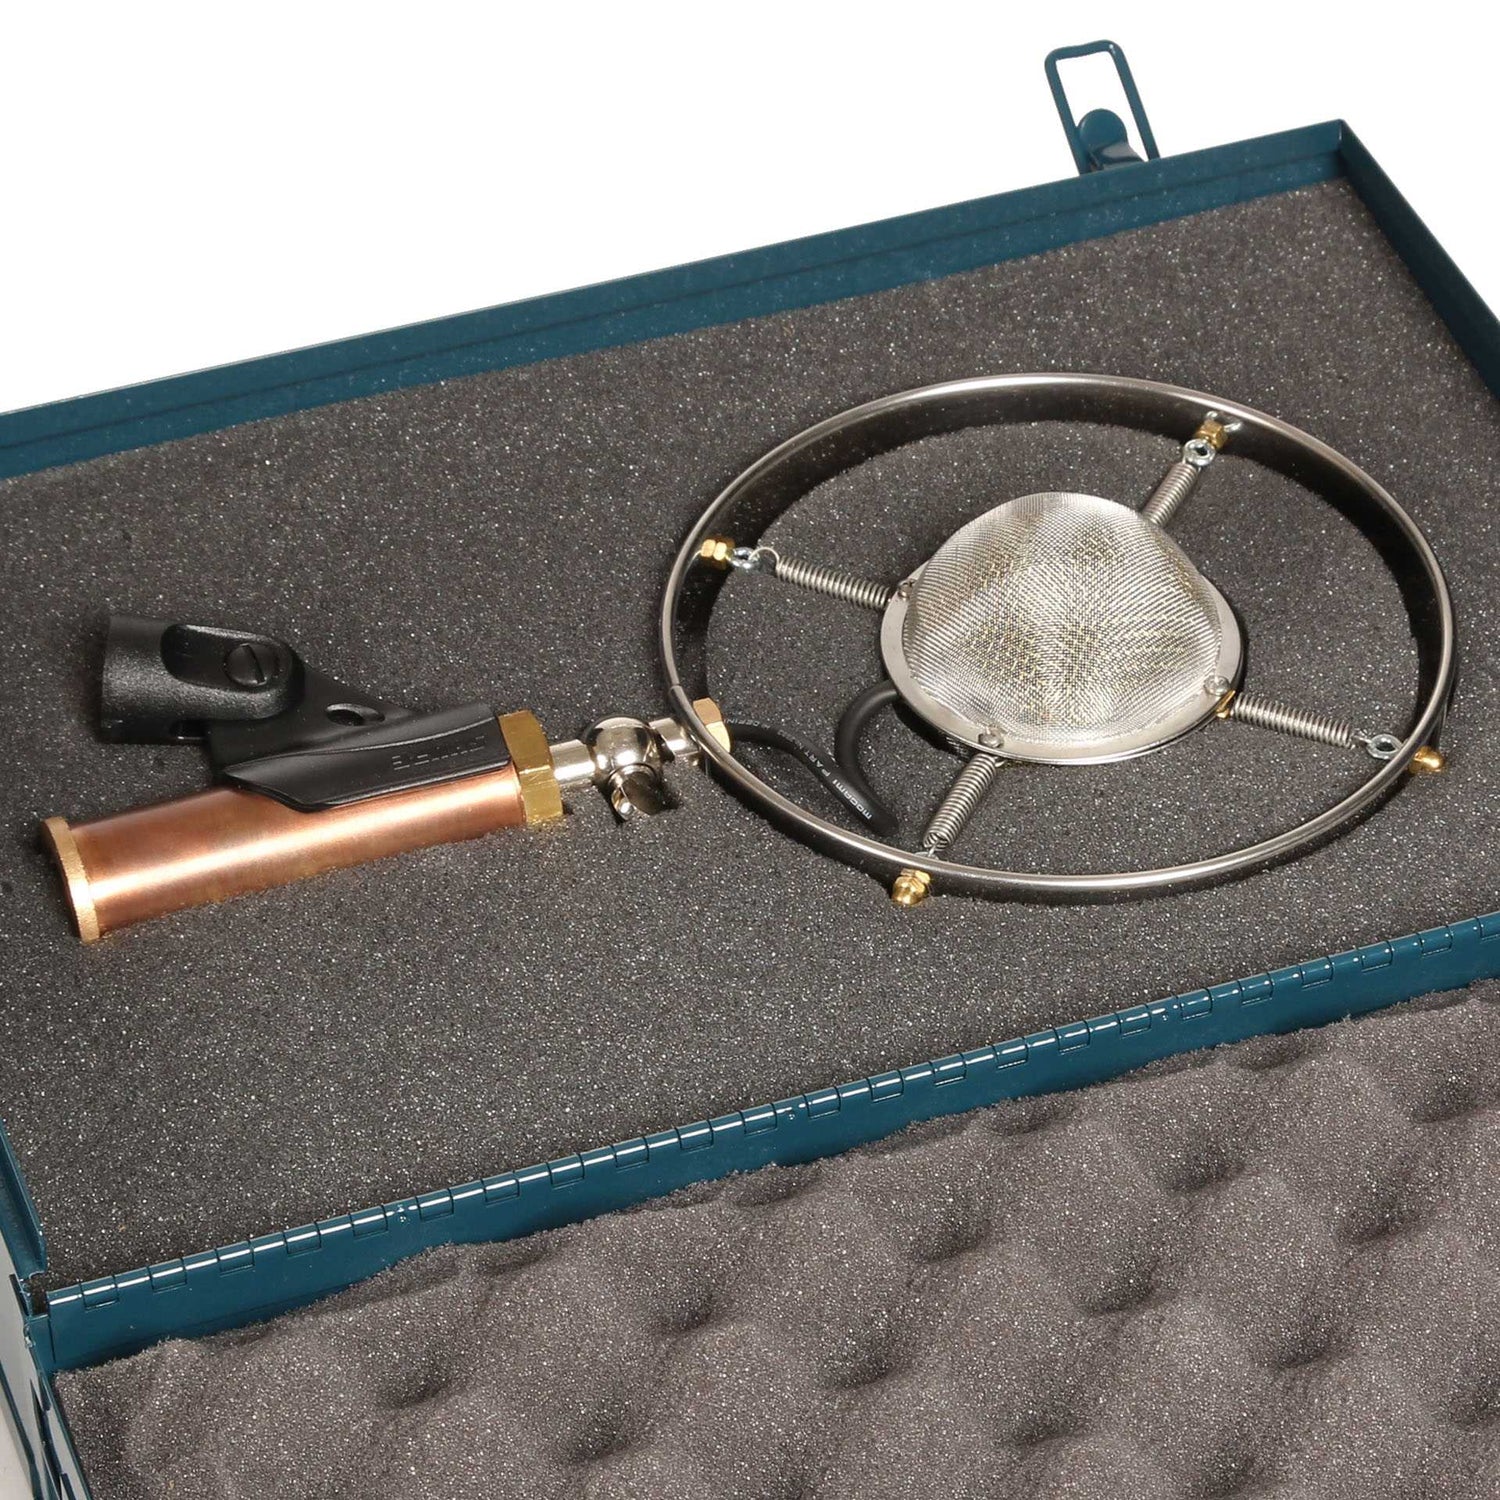 Full front of Ear Trumpet Labs Louise Condenser Microphone in case